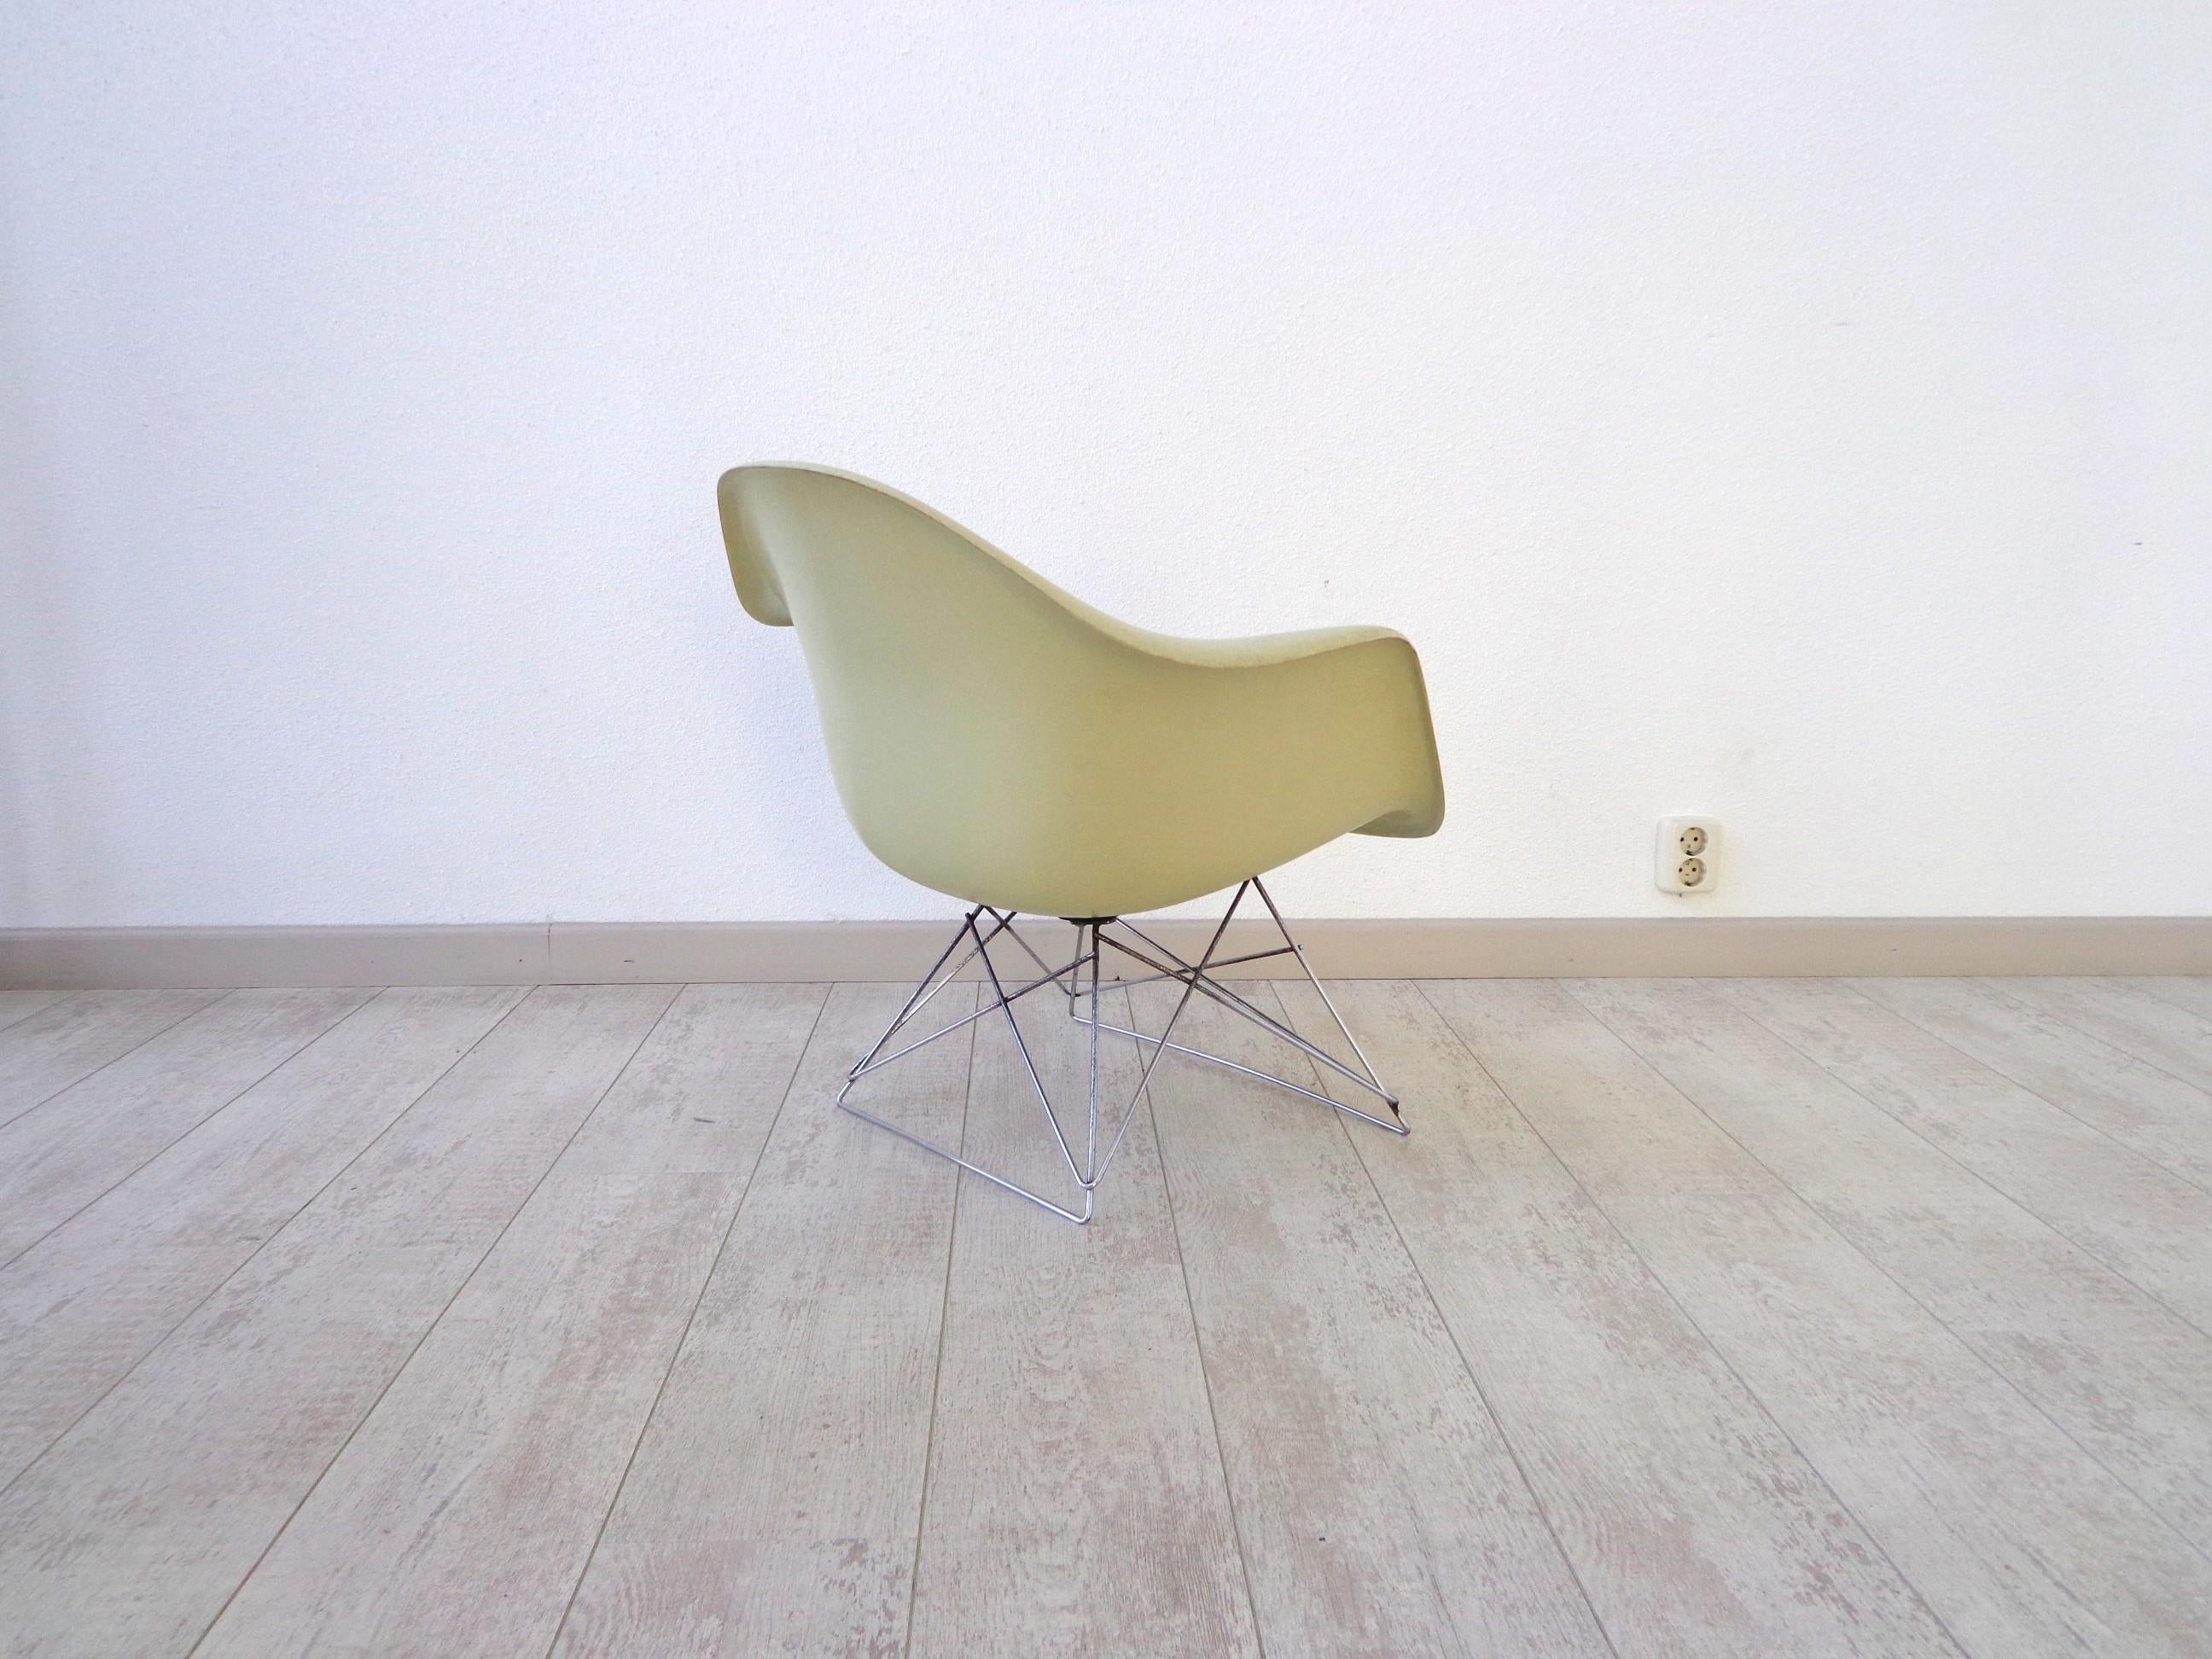 Mid-20th Century LAR Armchair by Charles & Ray Eames for Herman Miller 1960s